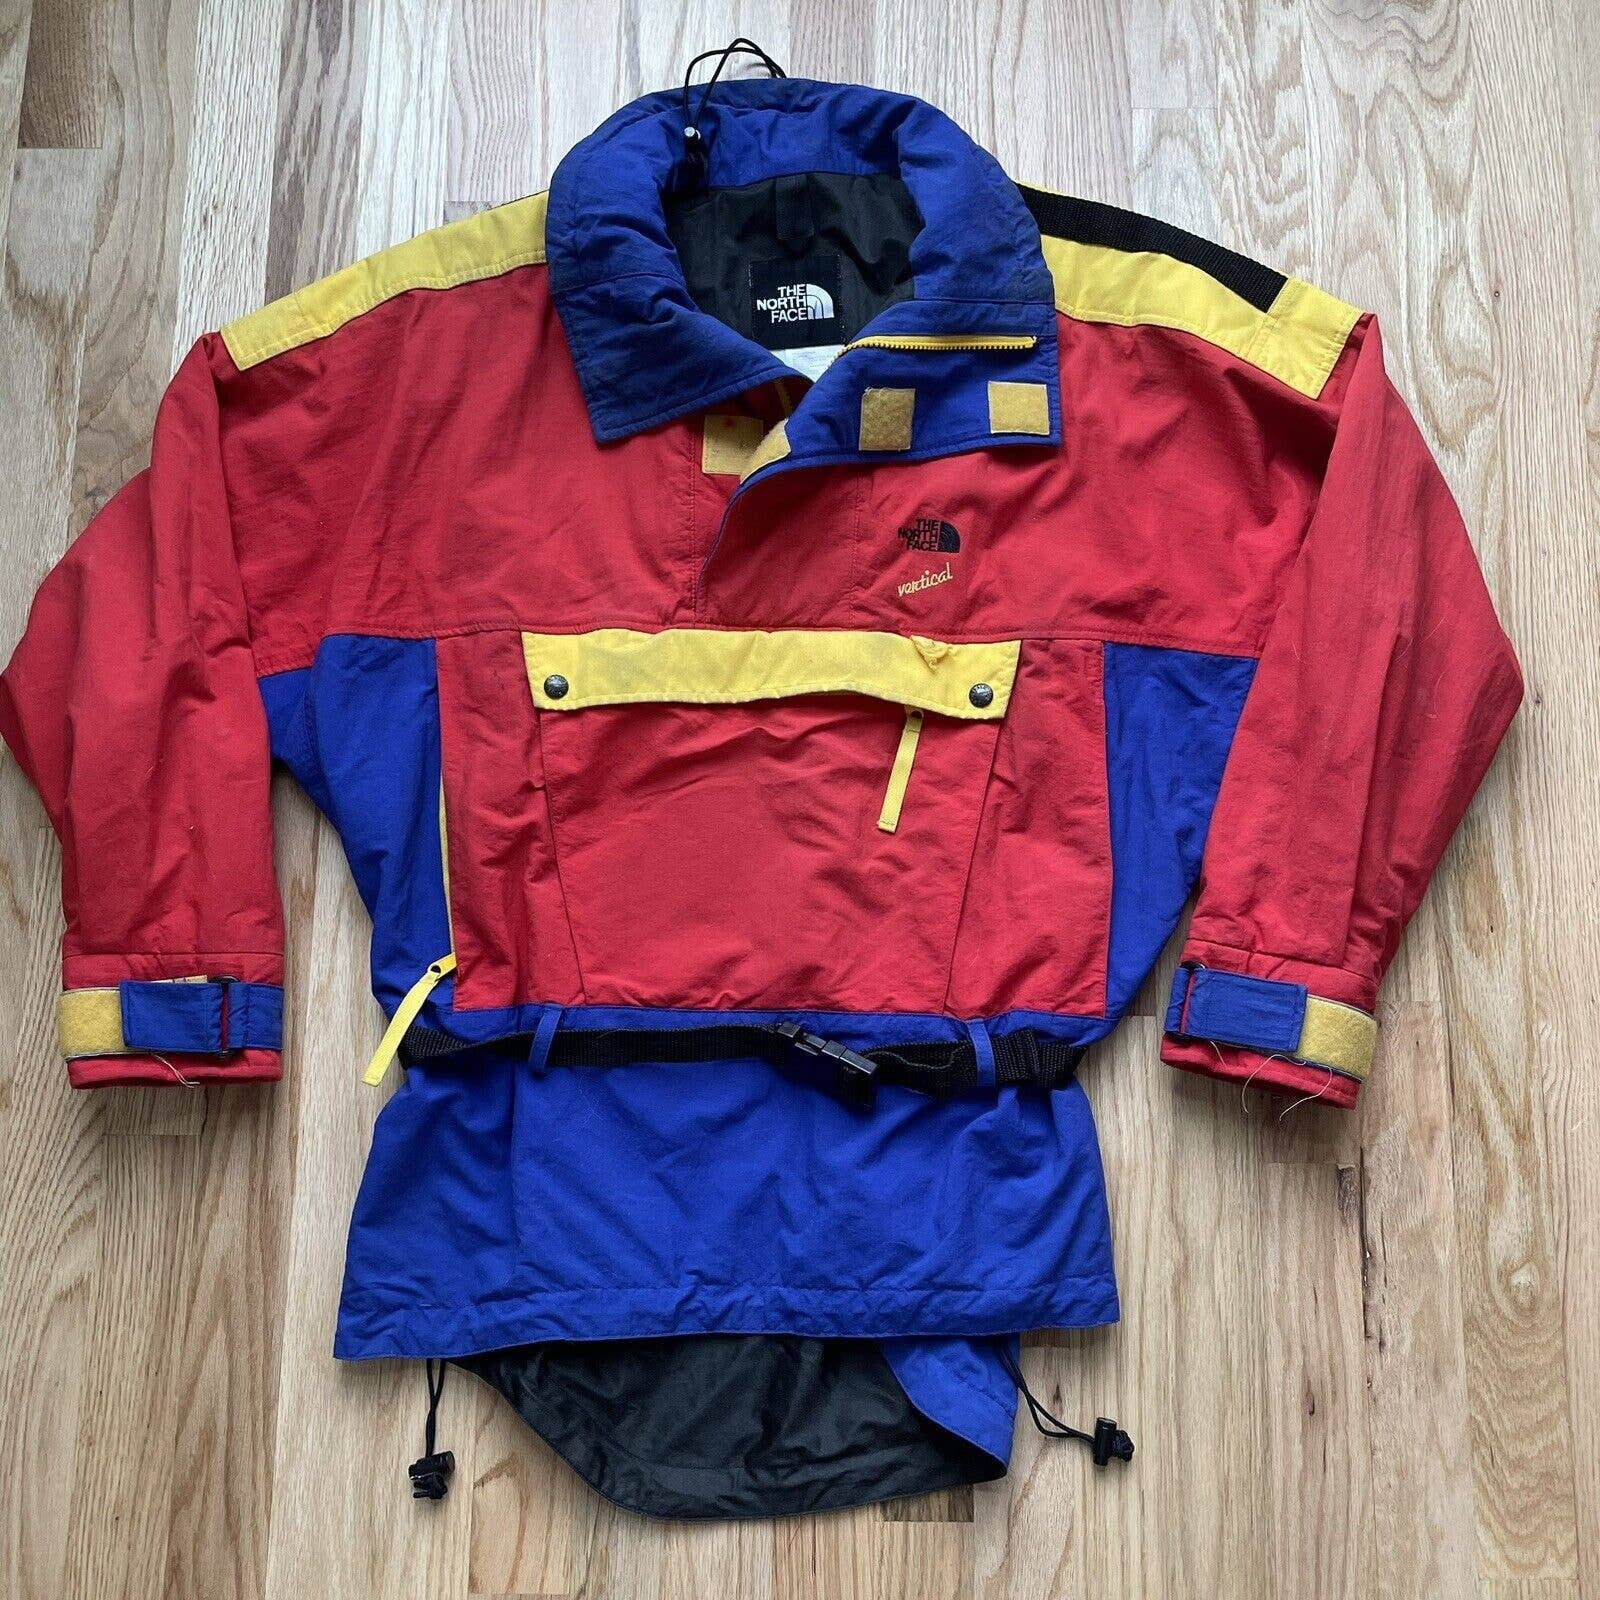 THE NORTH FACE x SIZE? 20TH ANNIVERSARY STEEP TECH APOGEE JACKET size M